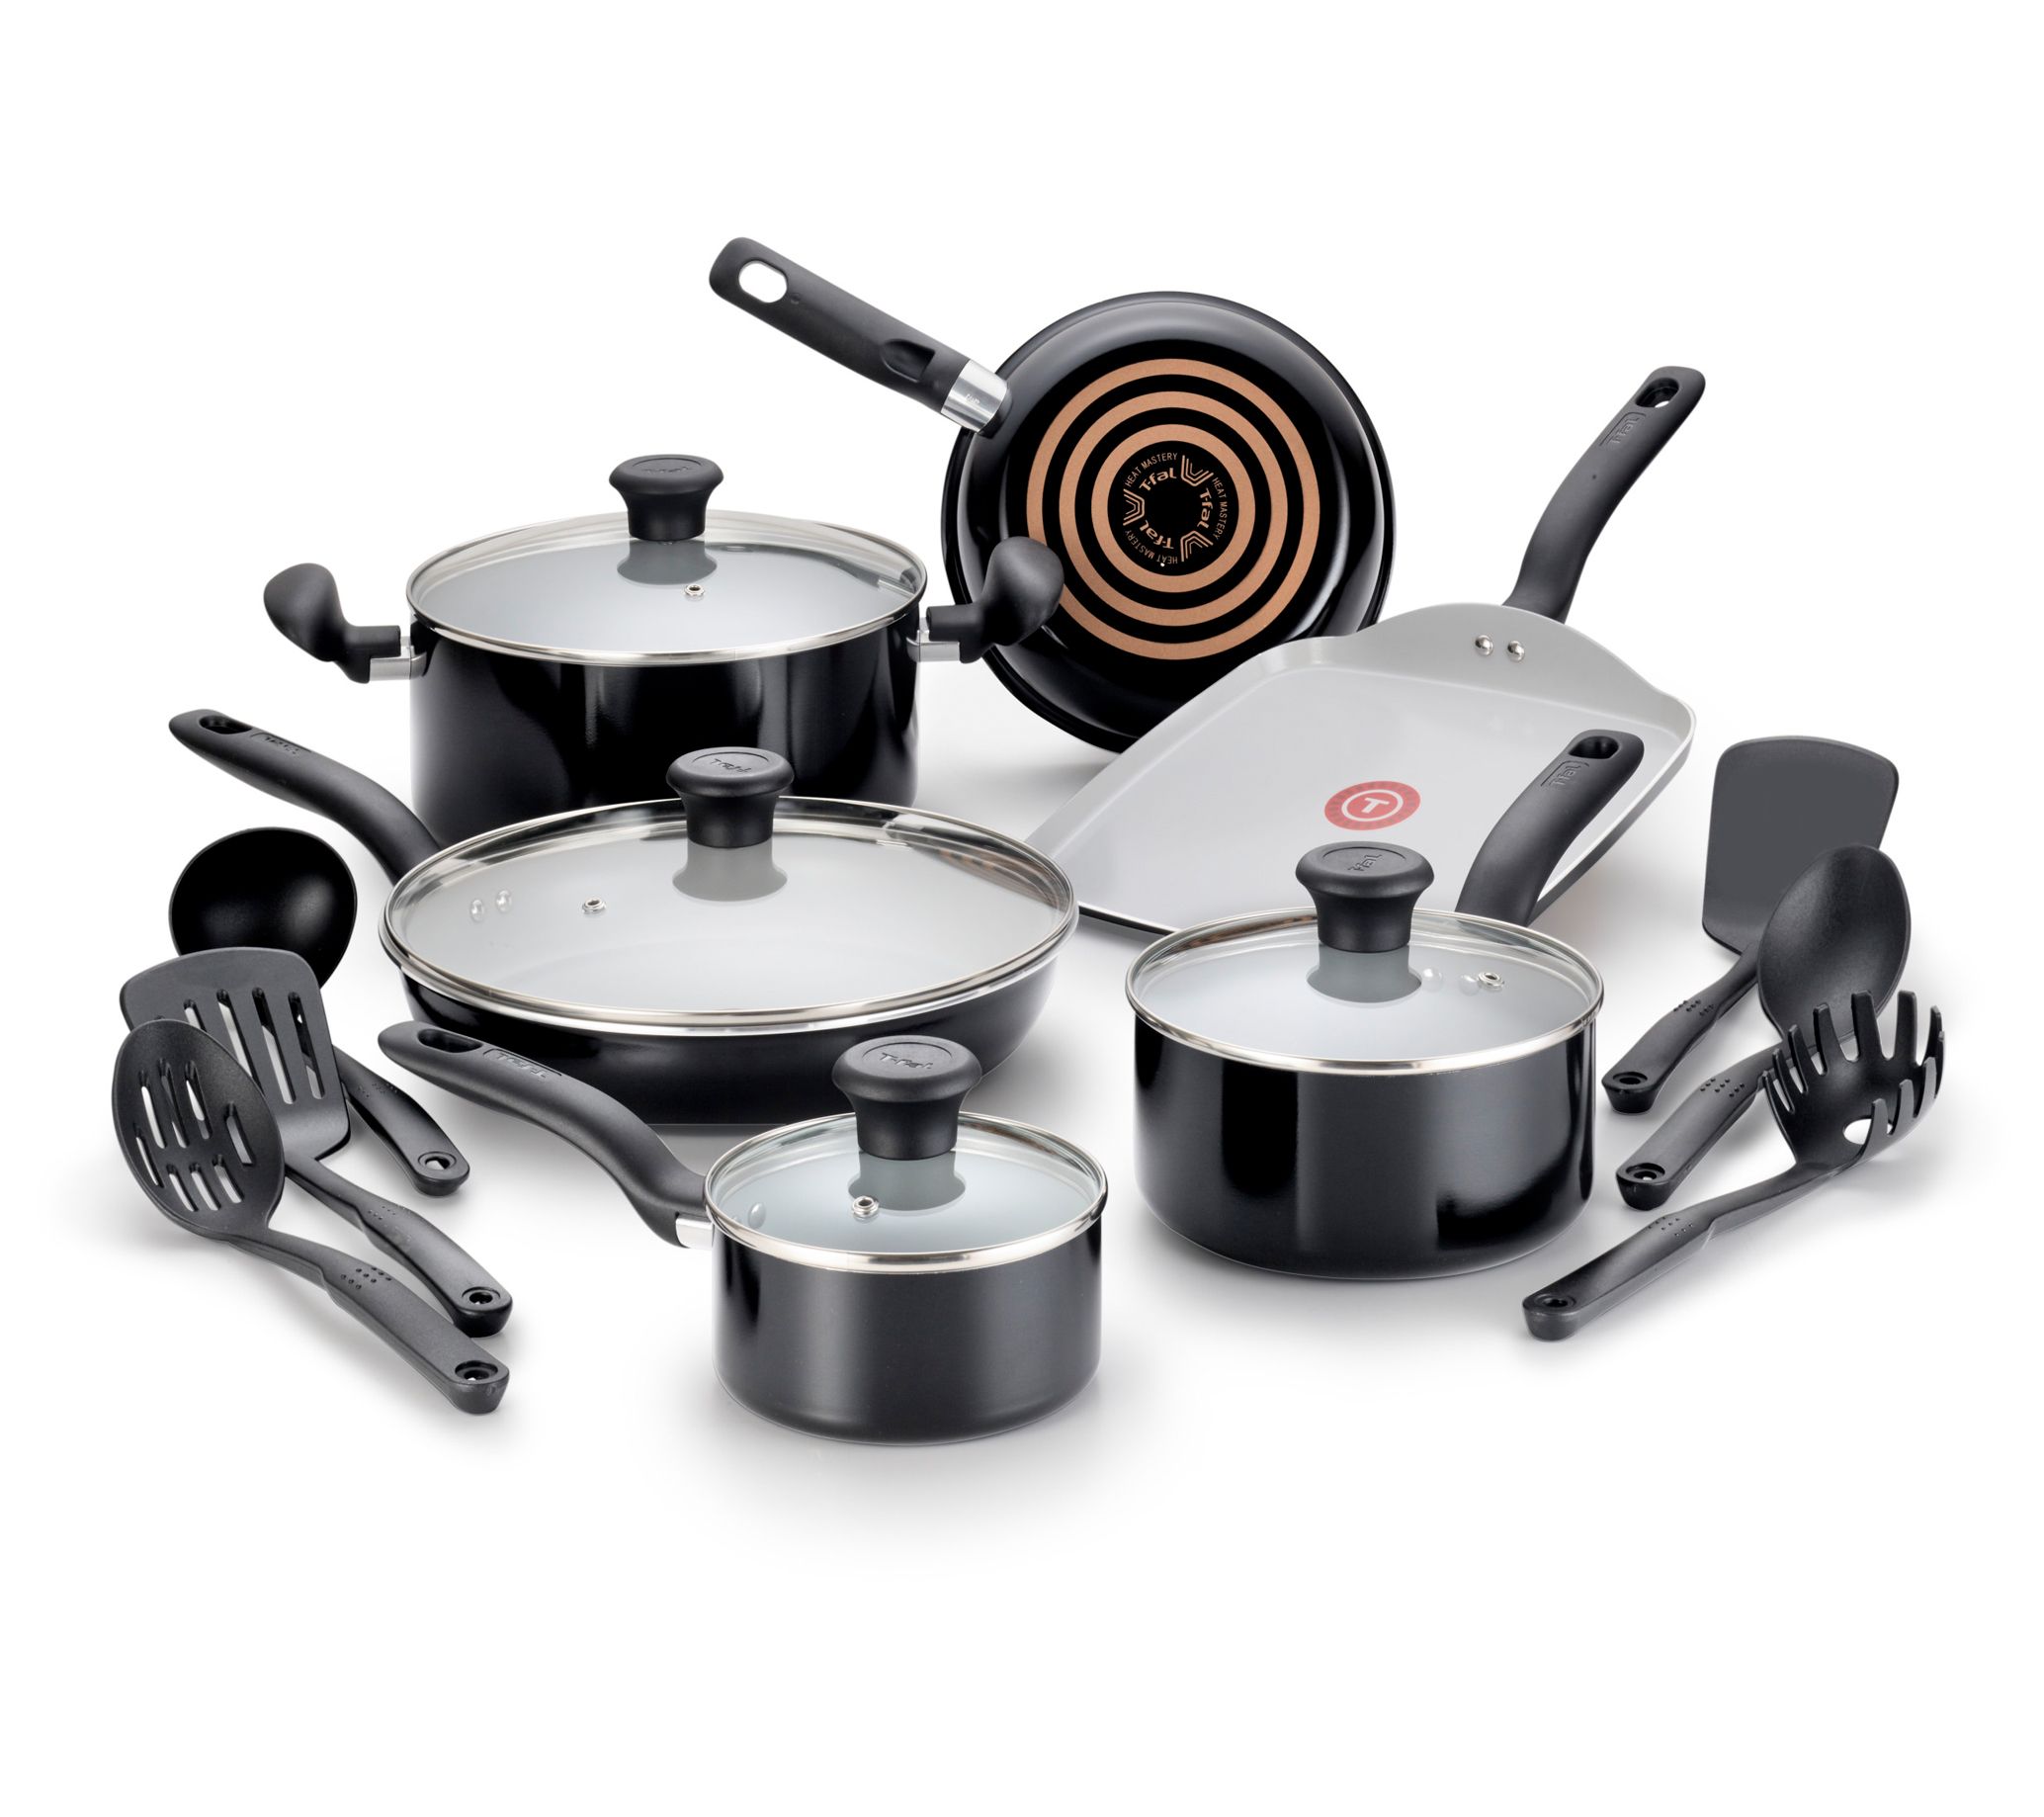 T-fal Initiatives Ceramic 16-pc. Cookware Set Review: An